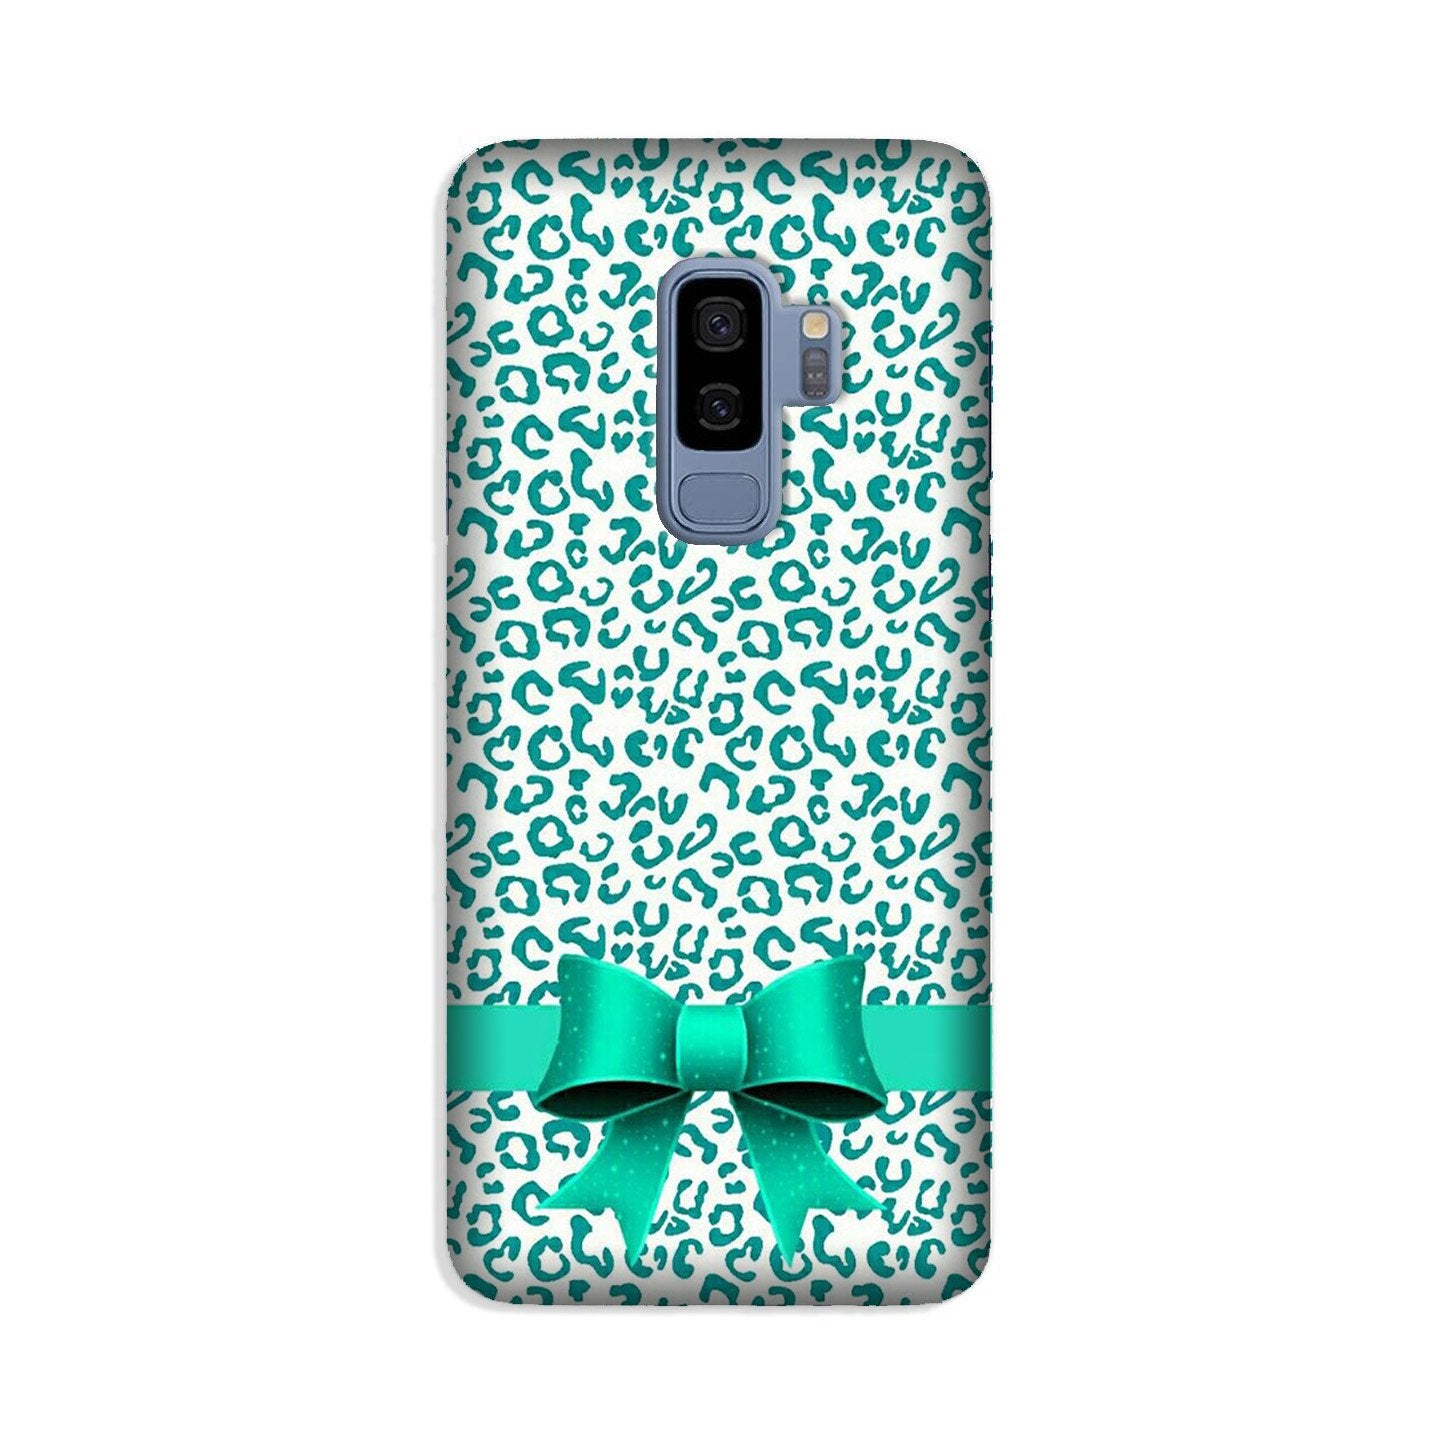 Gift Wrap6 Case for Galaxy S9 Plus